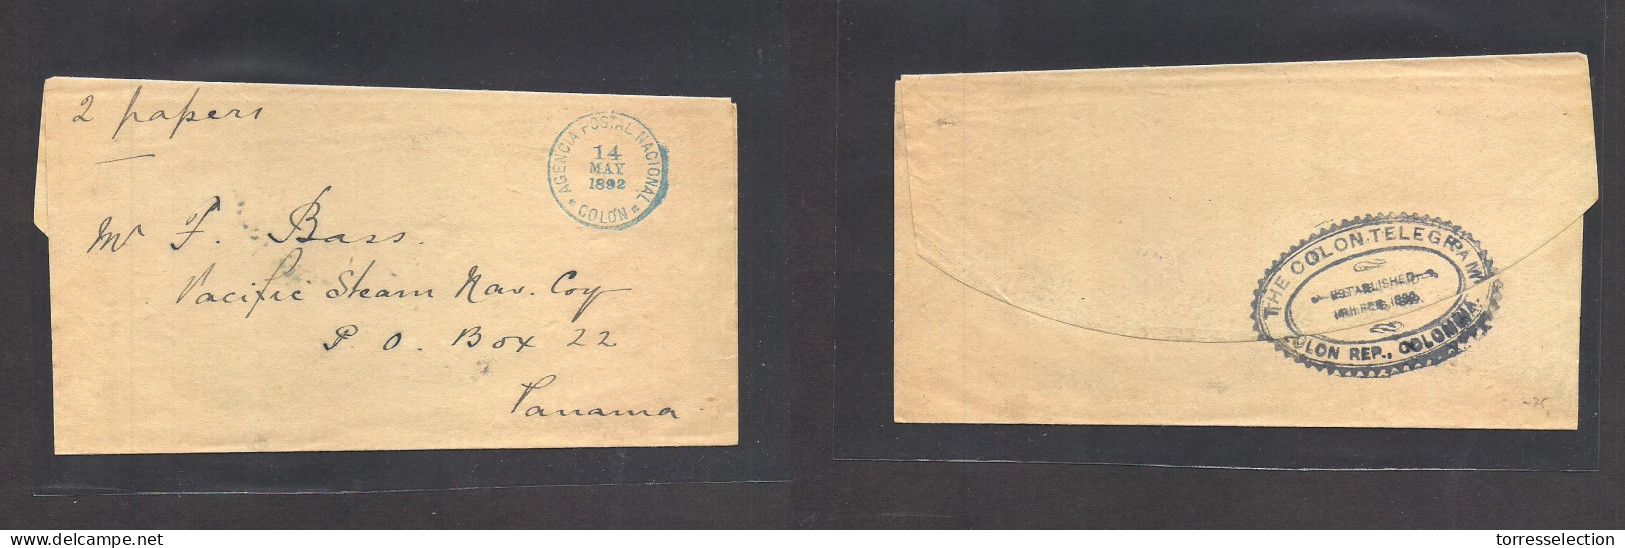 PANAMA. 1892 (14 May) APN Colon - Panama. The Colon Telegram Free Mail Complete Wrapper Blue Cds, Reverse Comercial Cach - Panamá